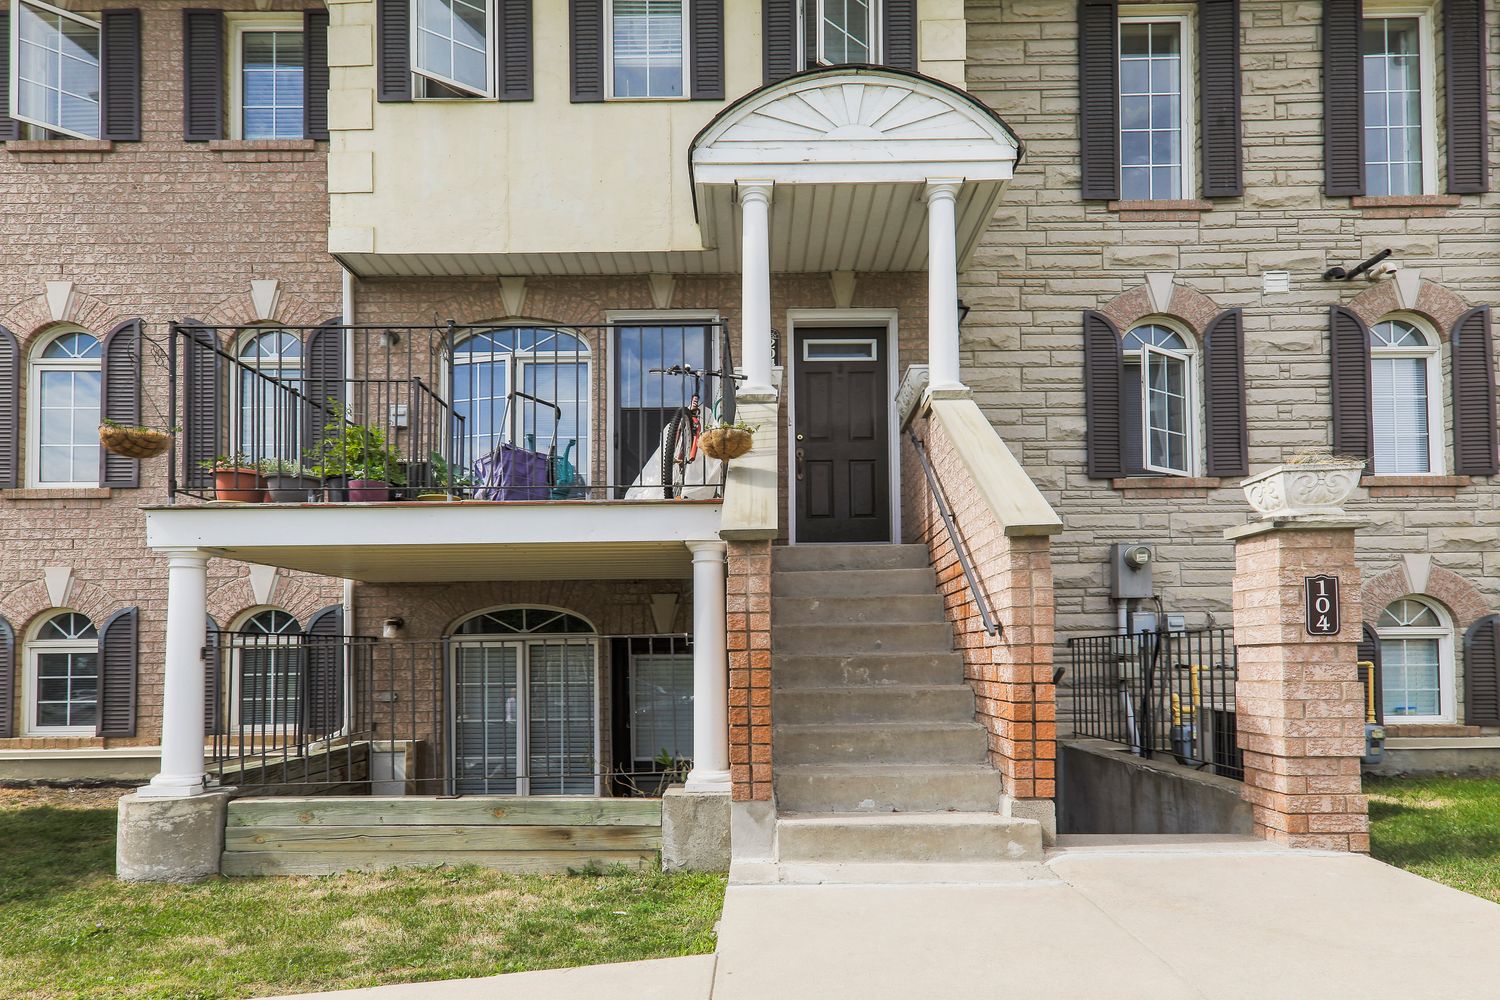 50-74 Sidney Belsey Crescent. Sidney Belsey Crescent Townhomes is located in  York Crosstown, Toronto - image #4 of 4